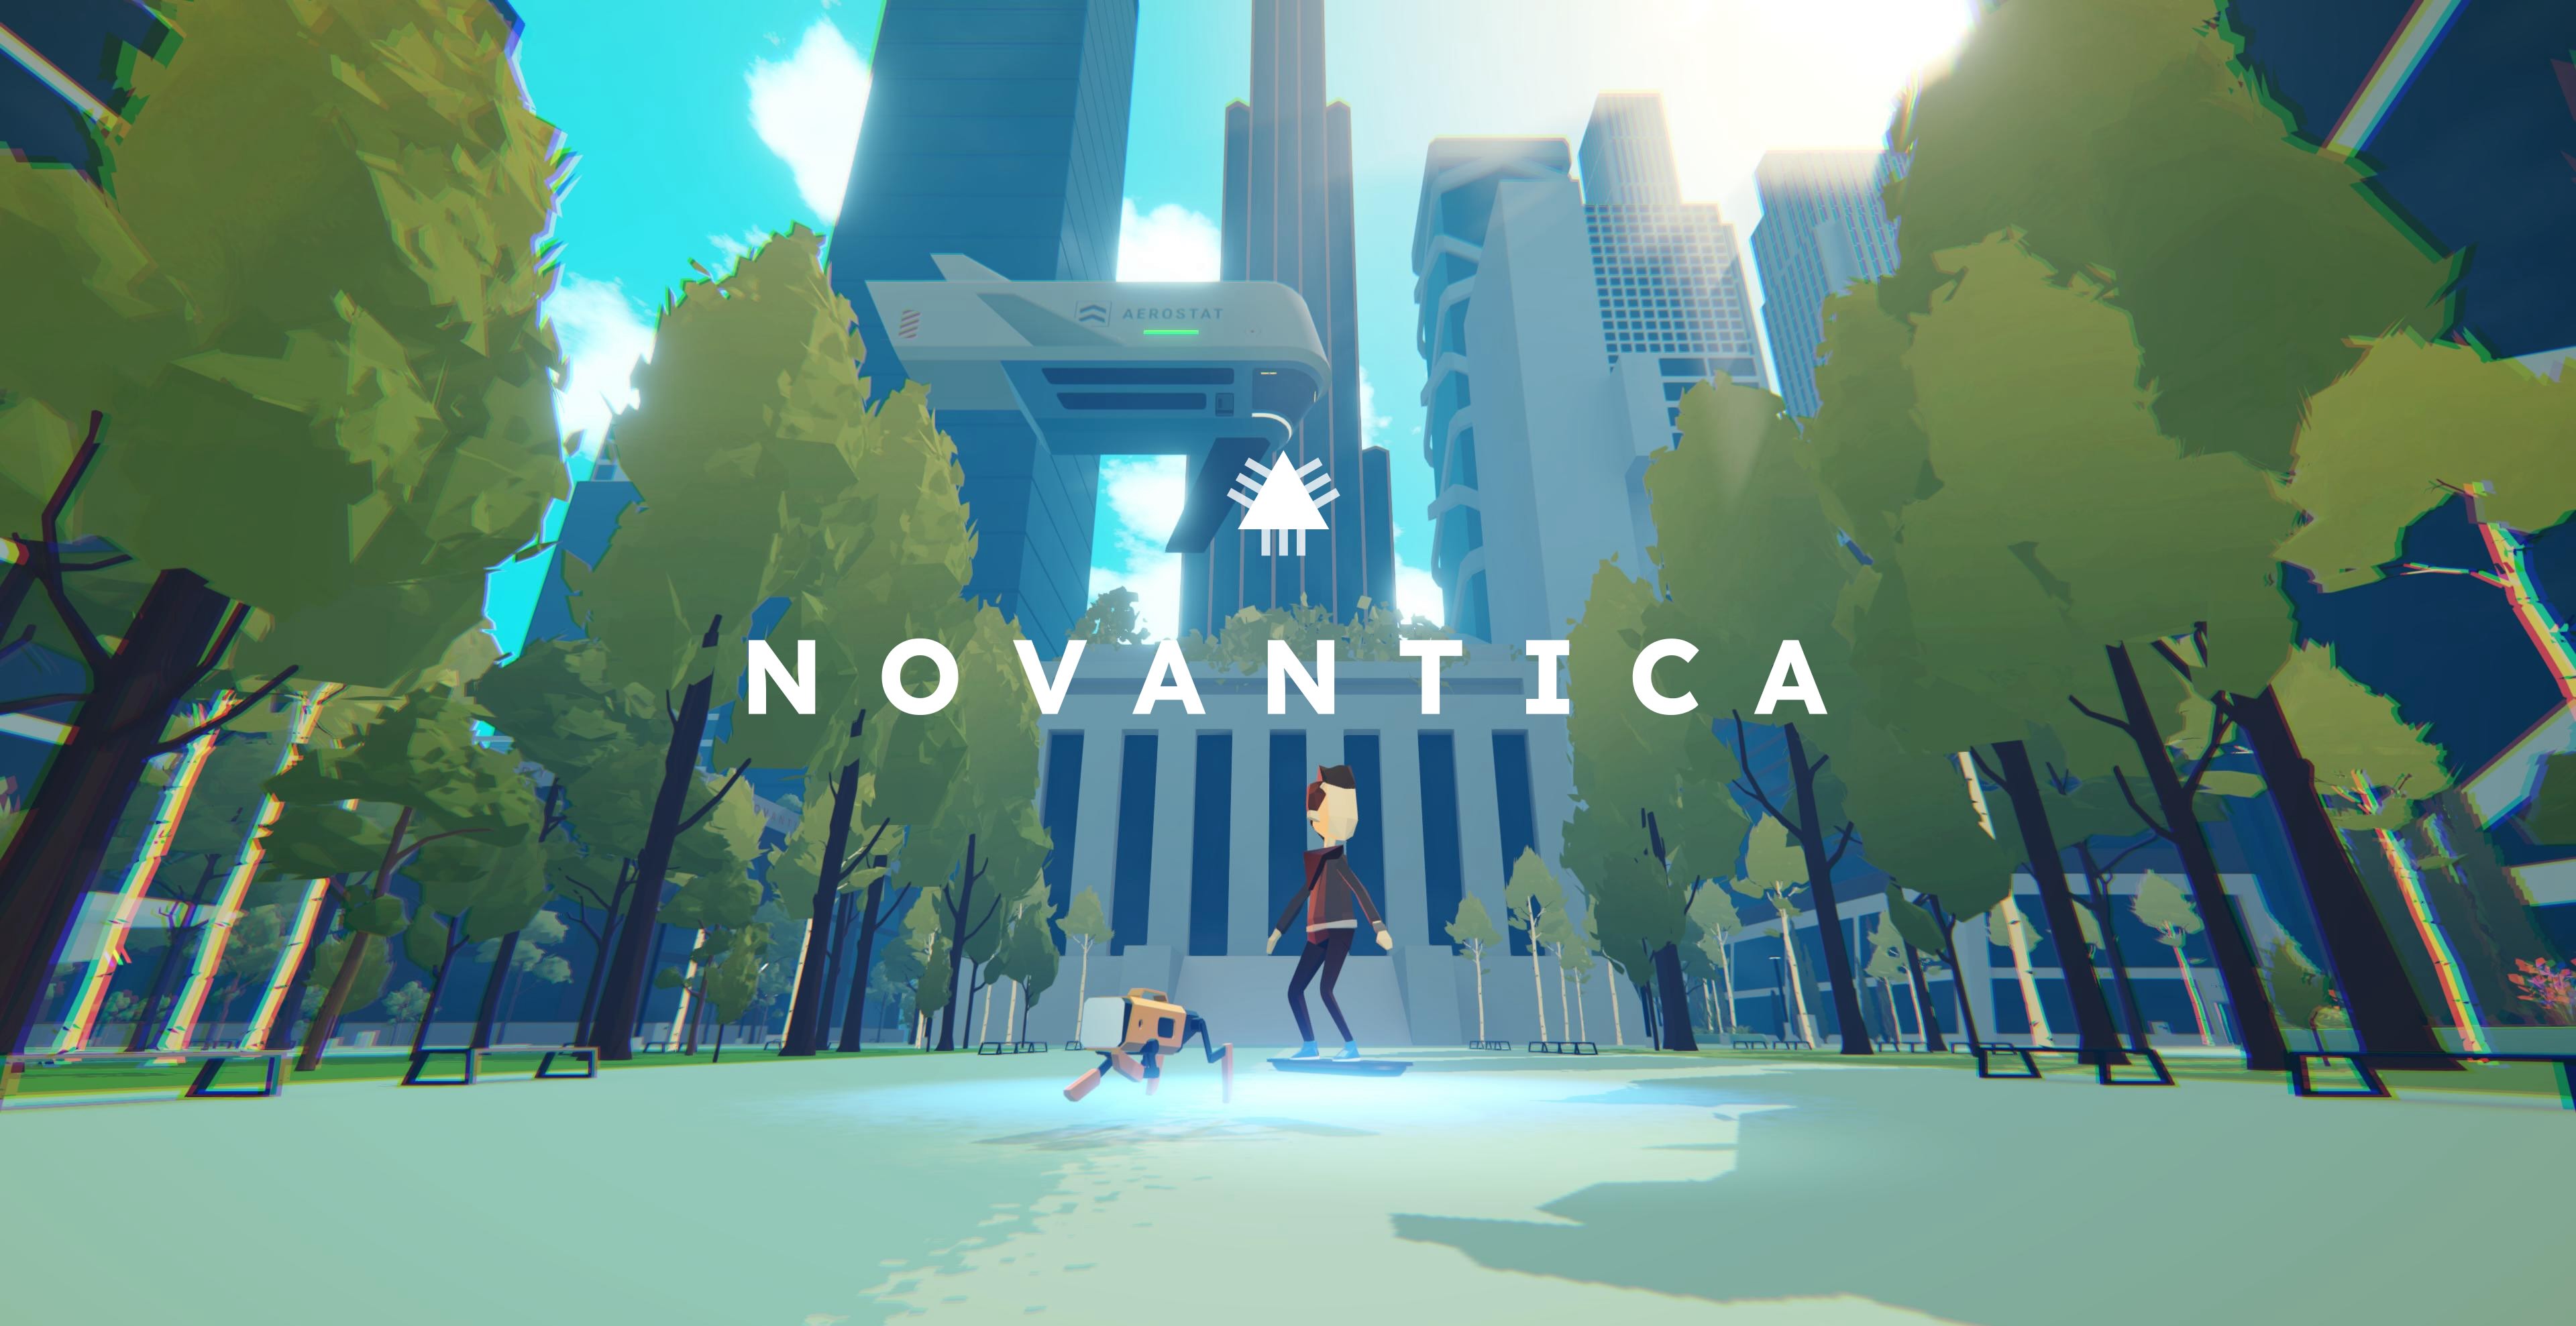 Novantica game screenshot with protagonist on hoverboard